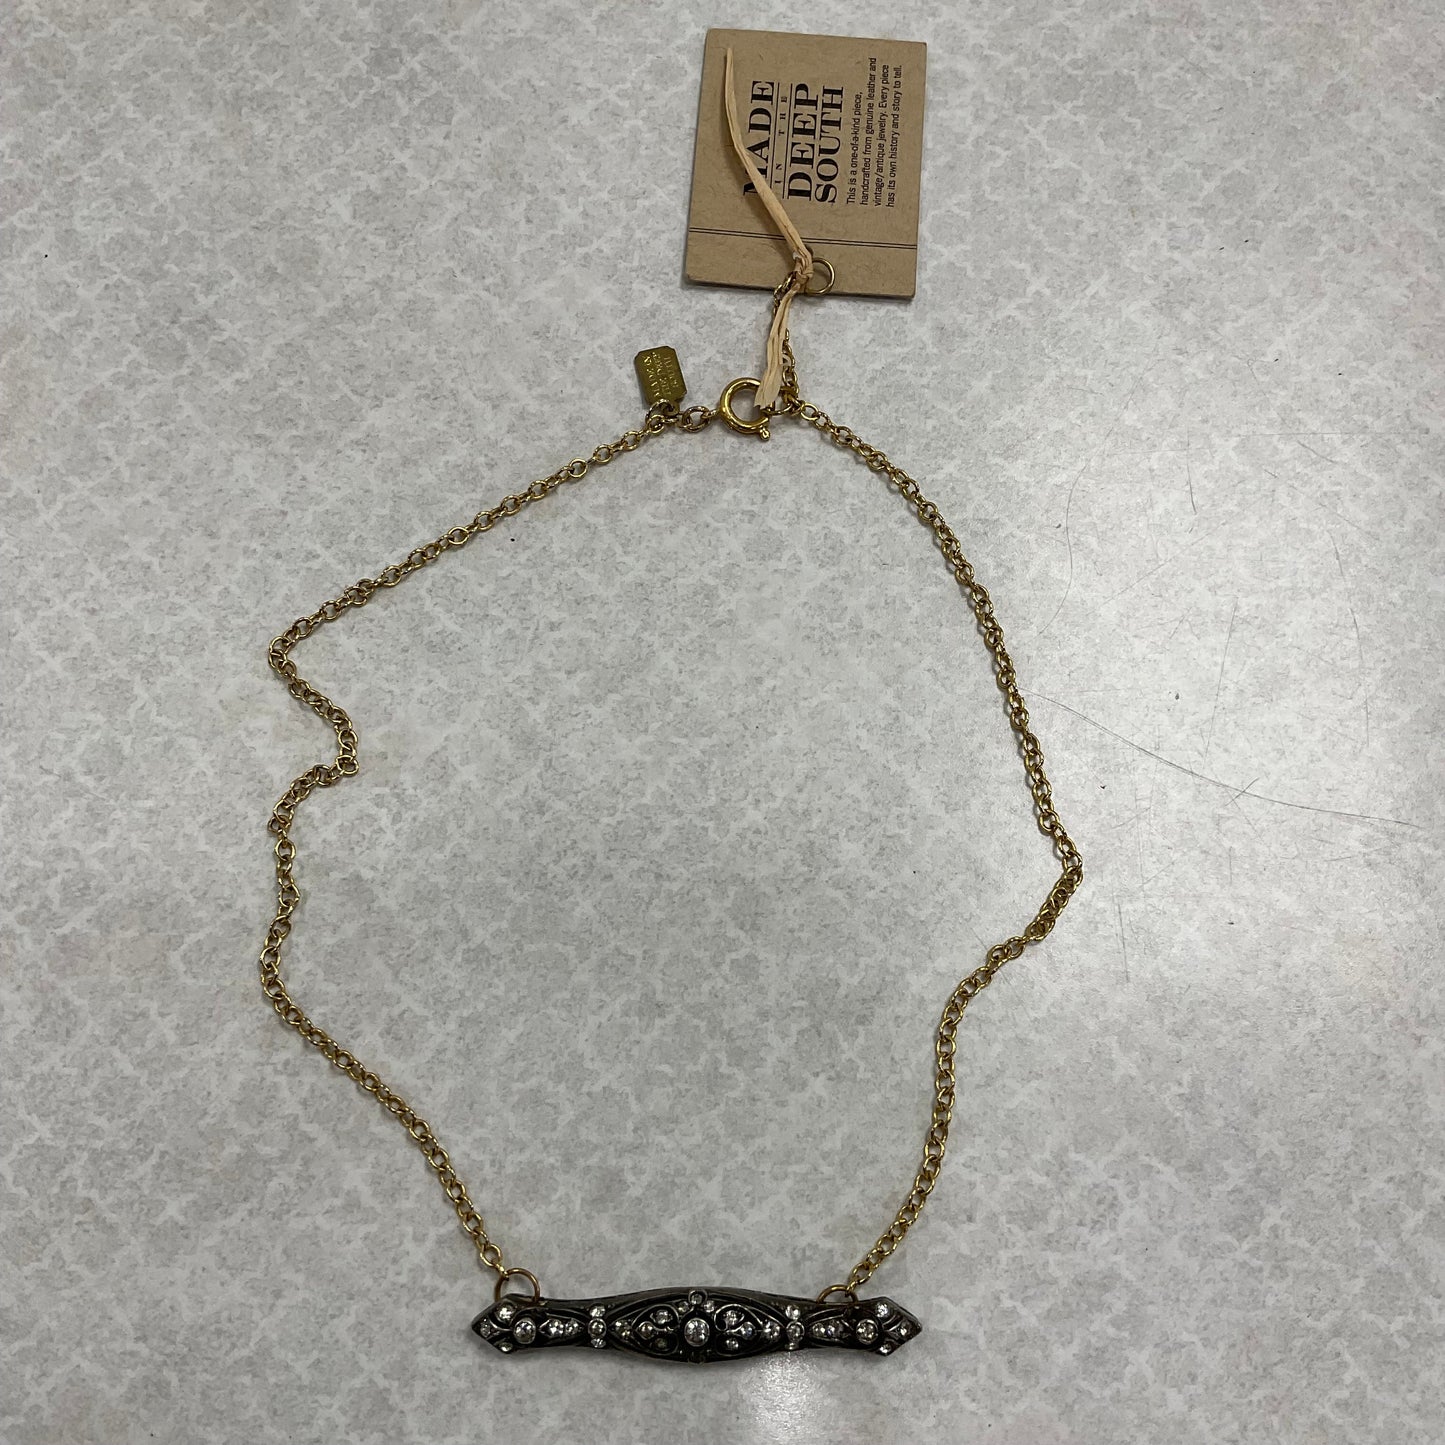 Necklace Chain MADE IN THE DEEP SOUTH